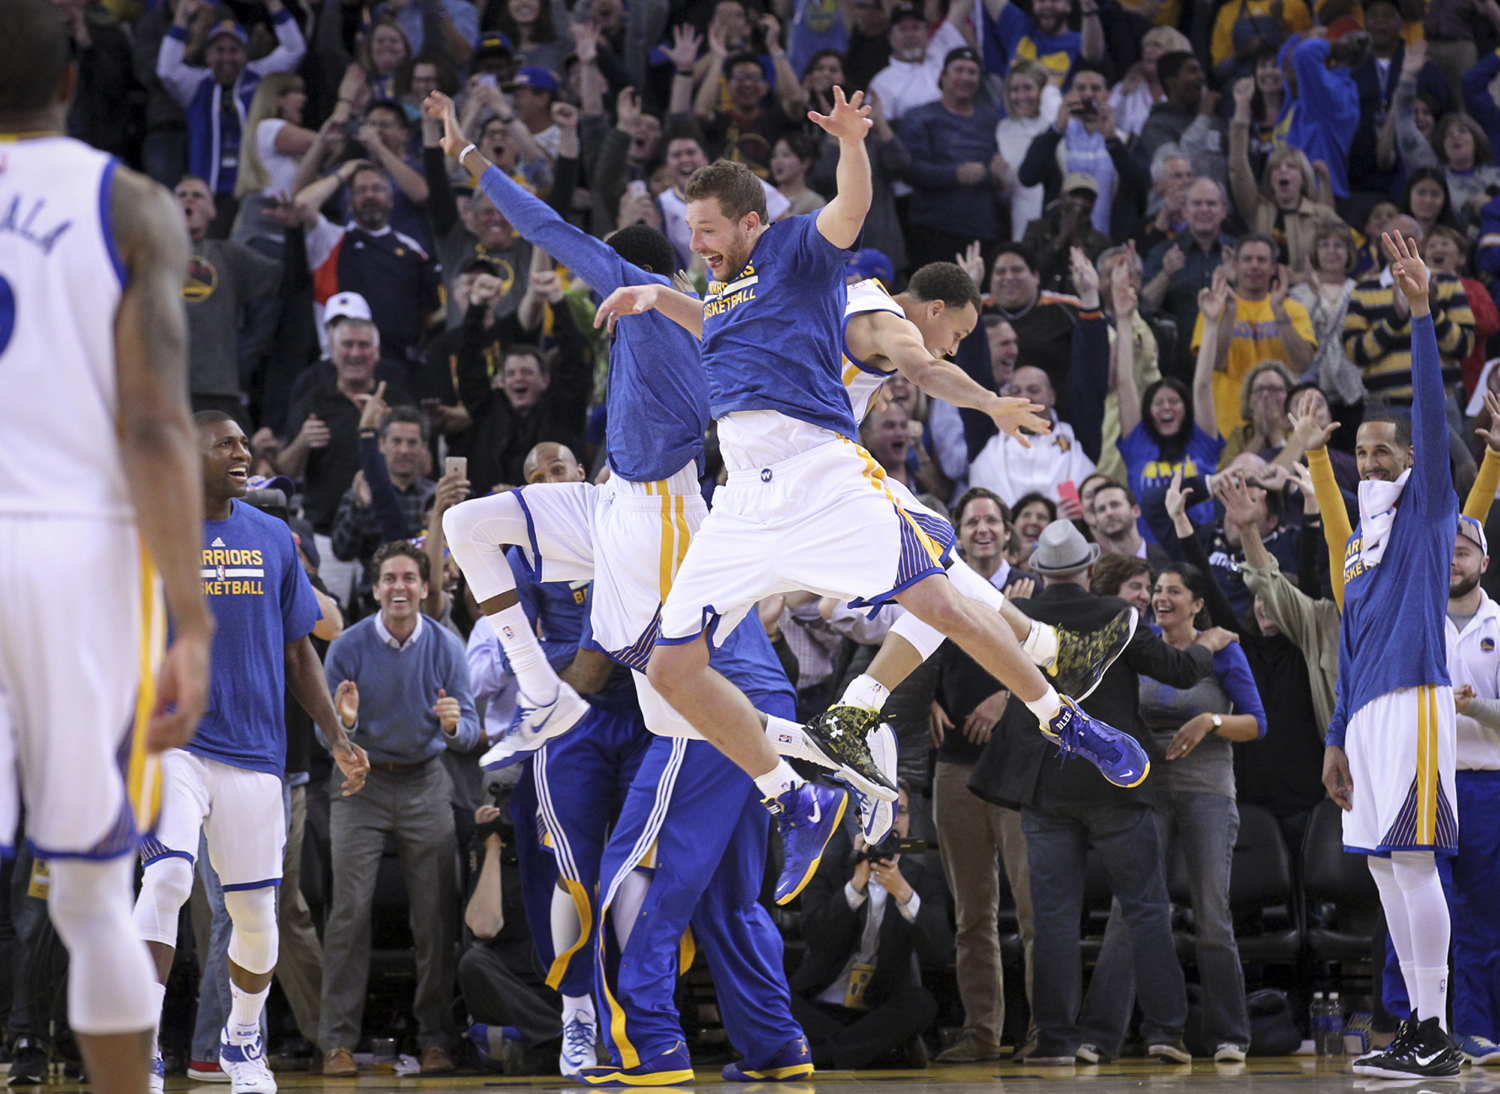 nba photographer jack arent holiday  lee and curry reacts during a timeout